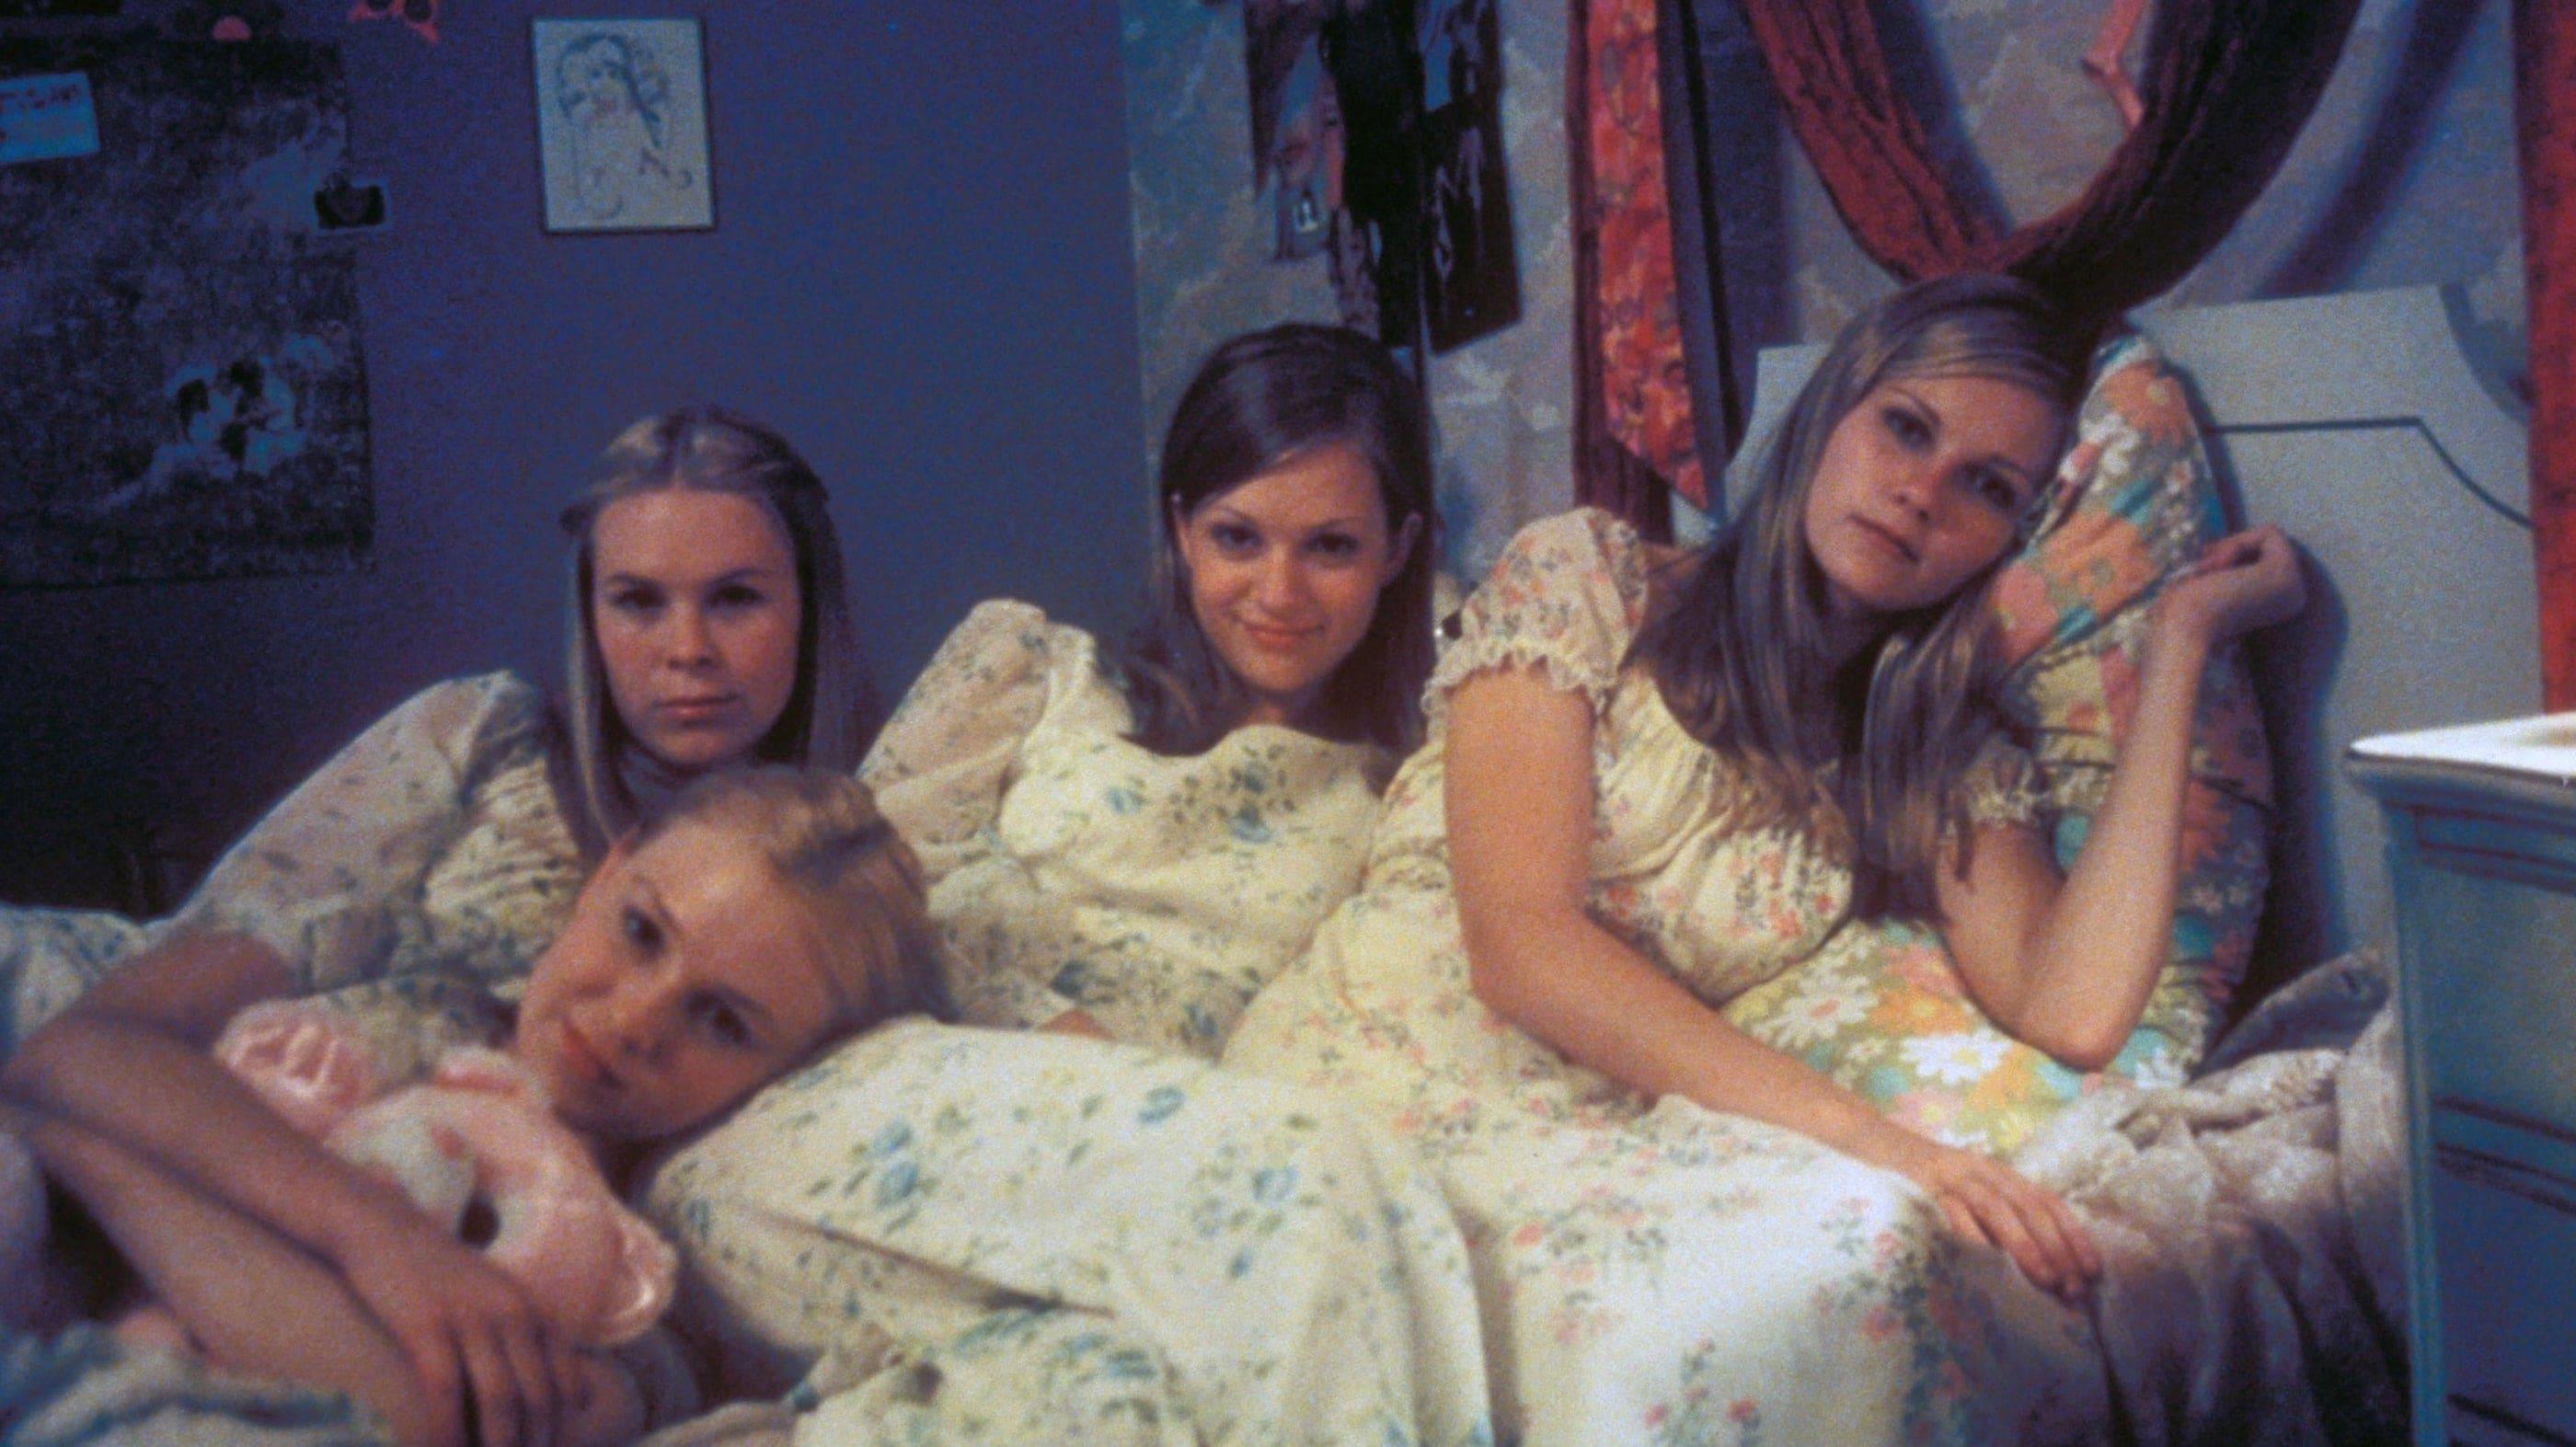 Revisiting The Virgin Suicides backdrop